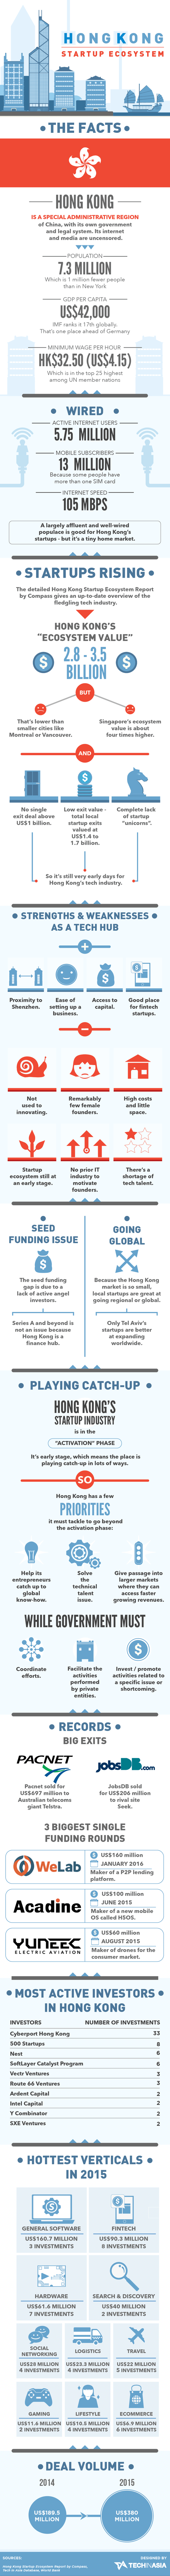 startups in hong kong infographic